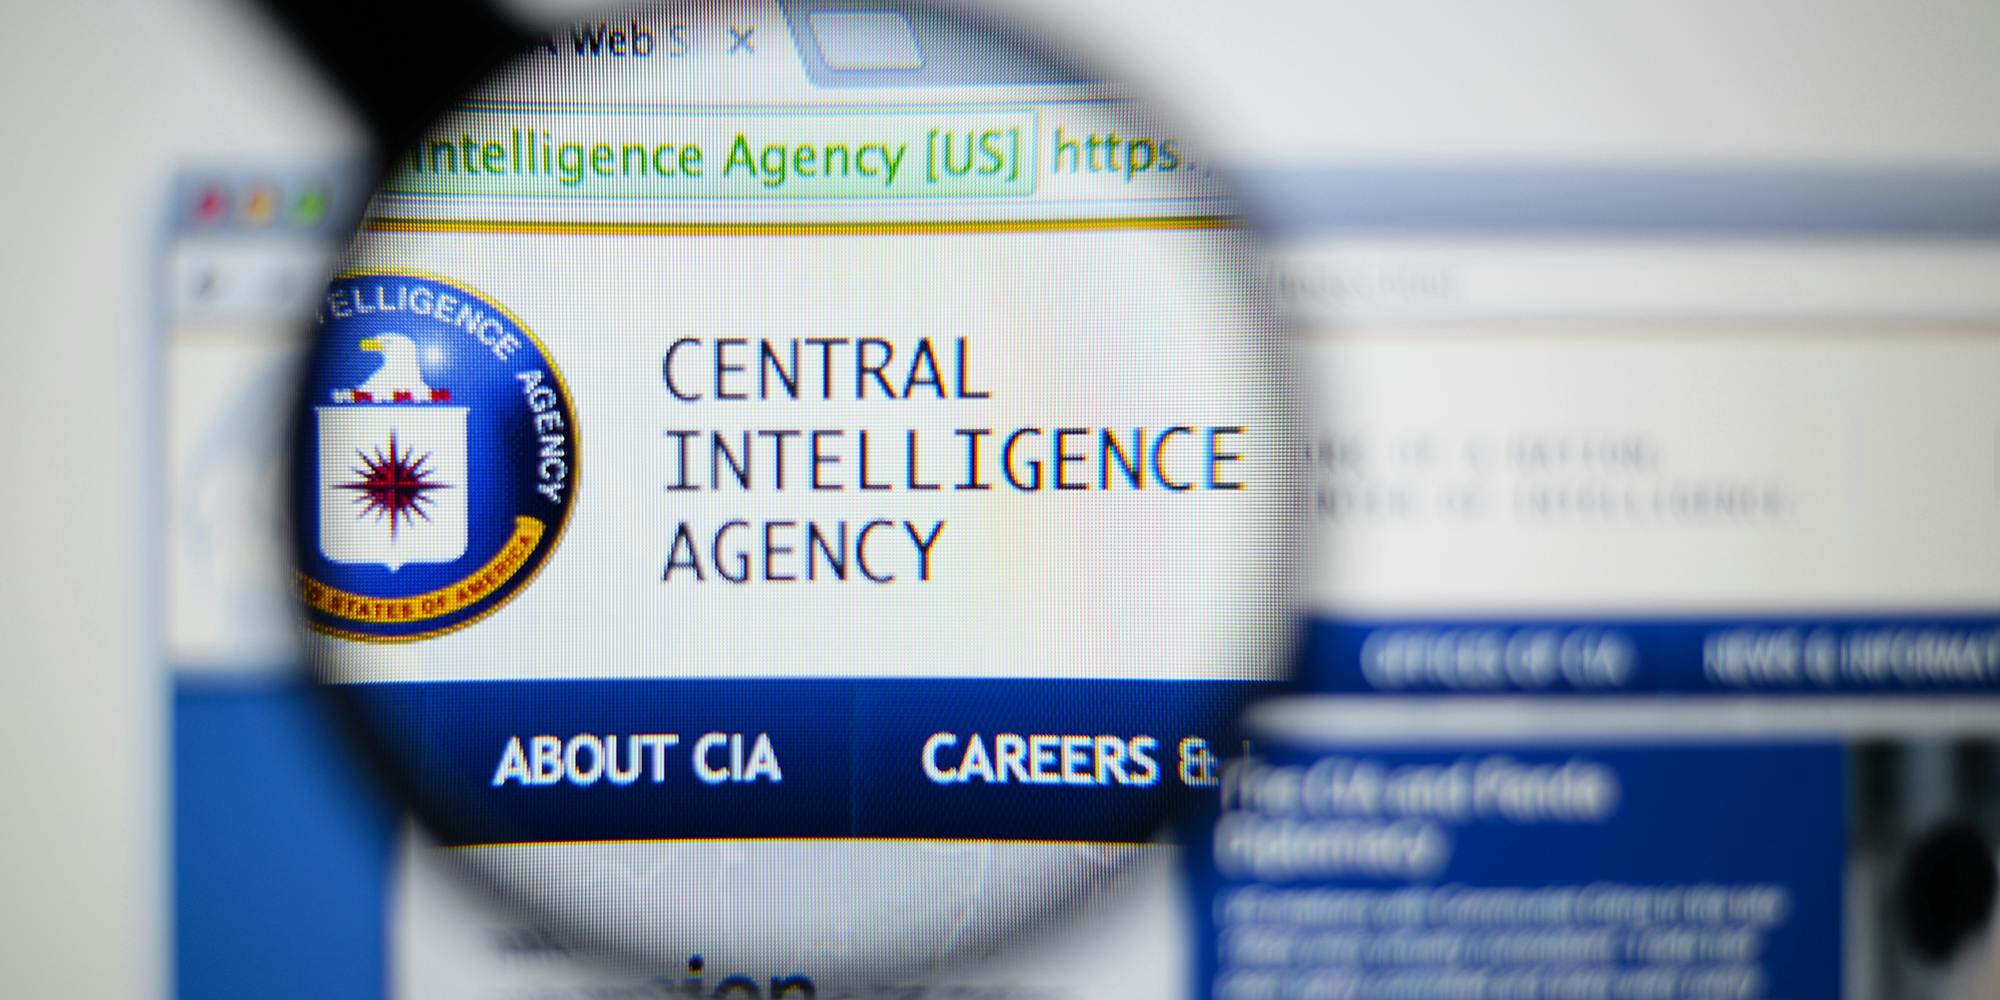 Magnifying glass over CIA website